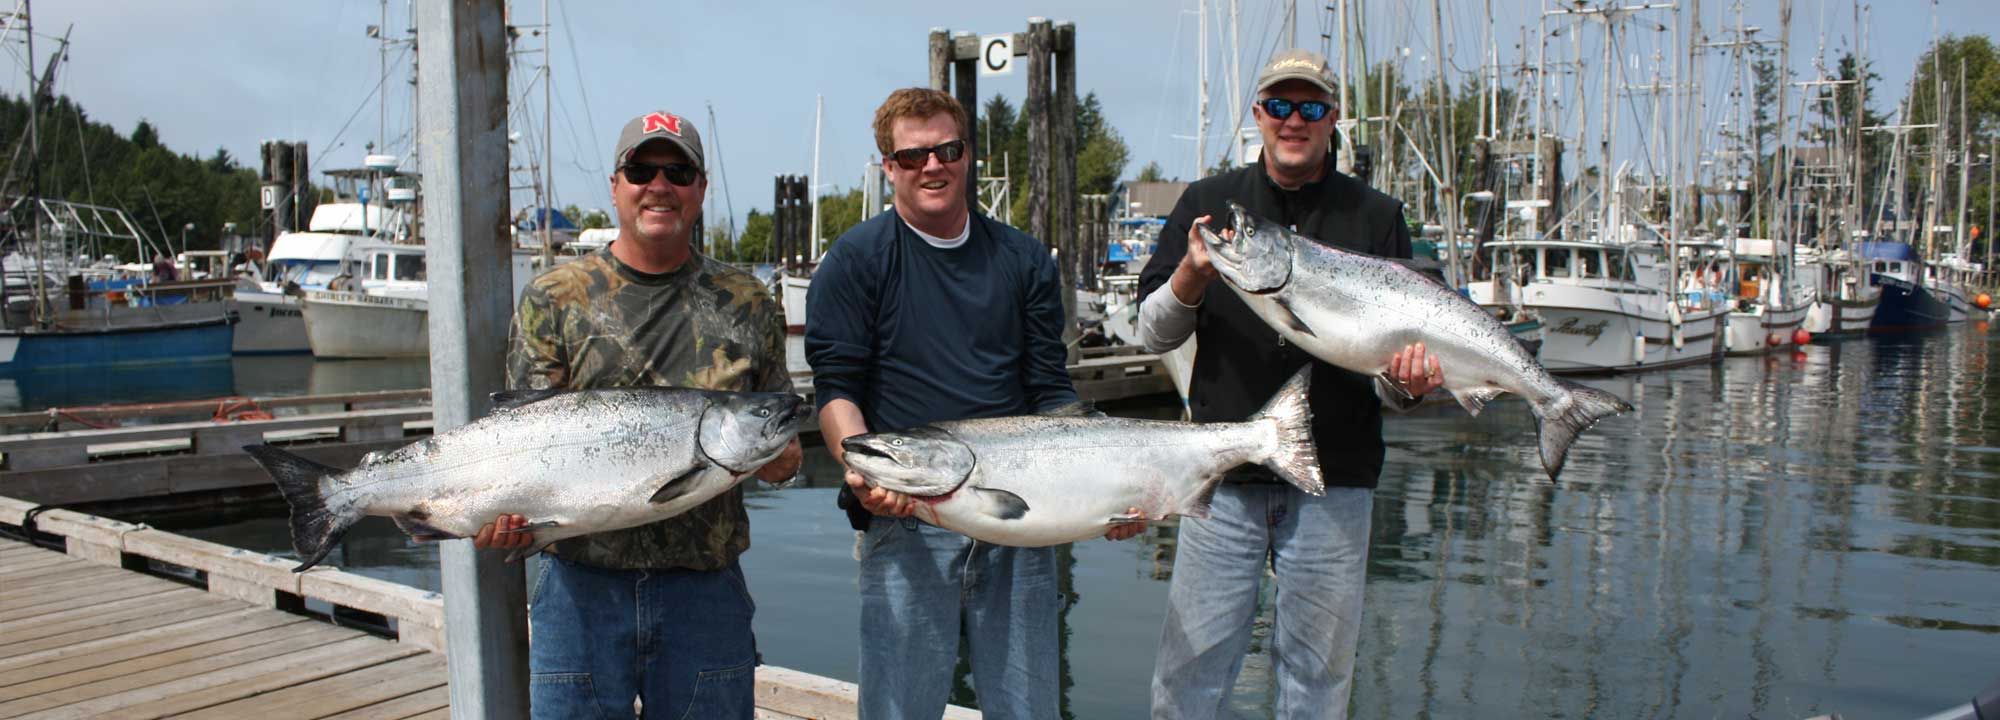 Salmon fishing from a Boston Whaler